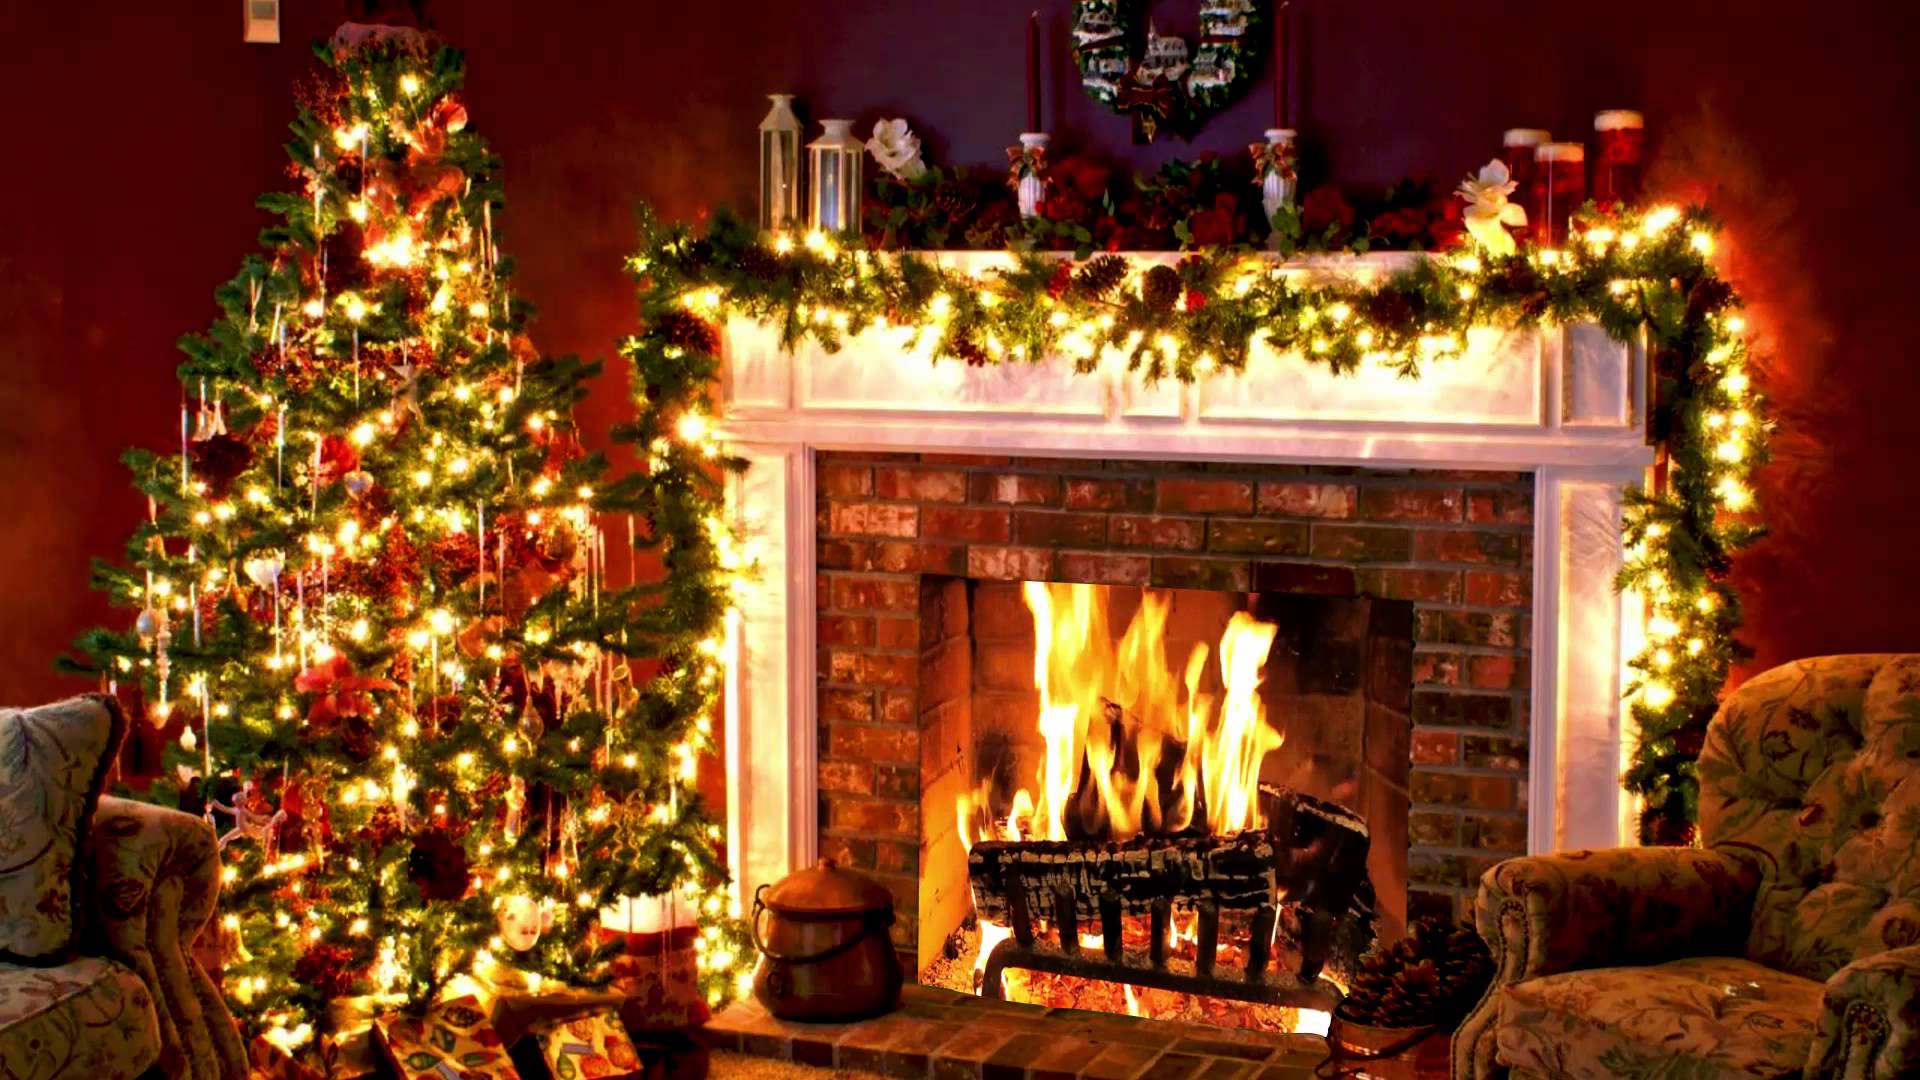 Home for Christmas HD Wallpaper. Background Image